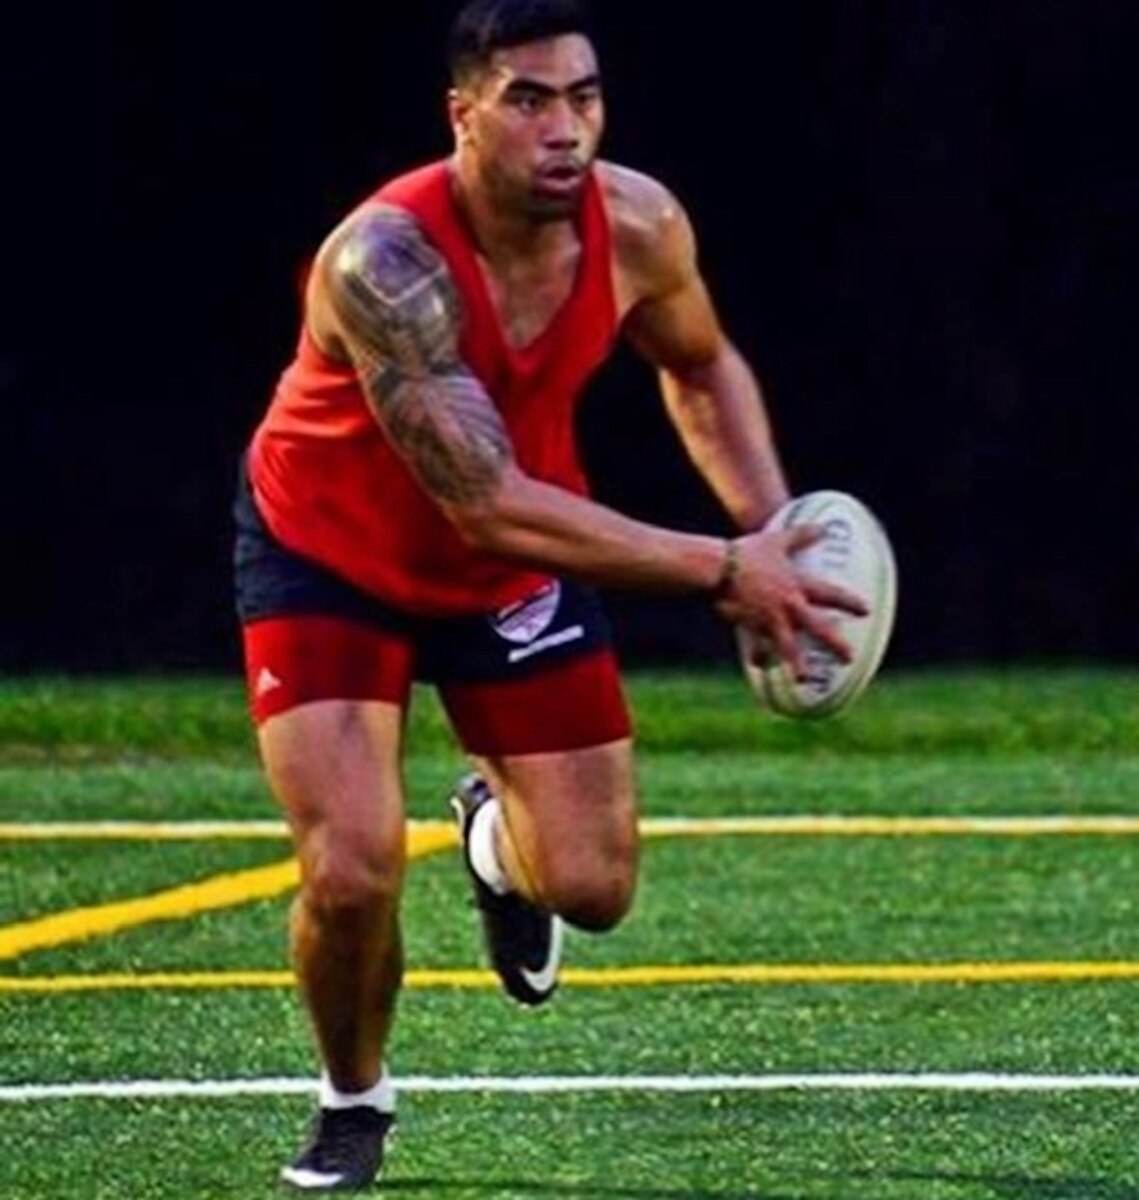 Man playing Rugby